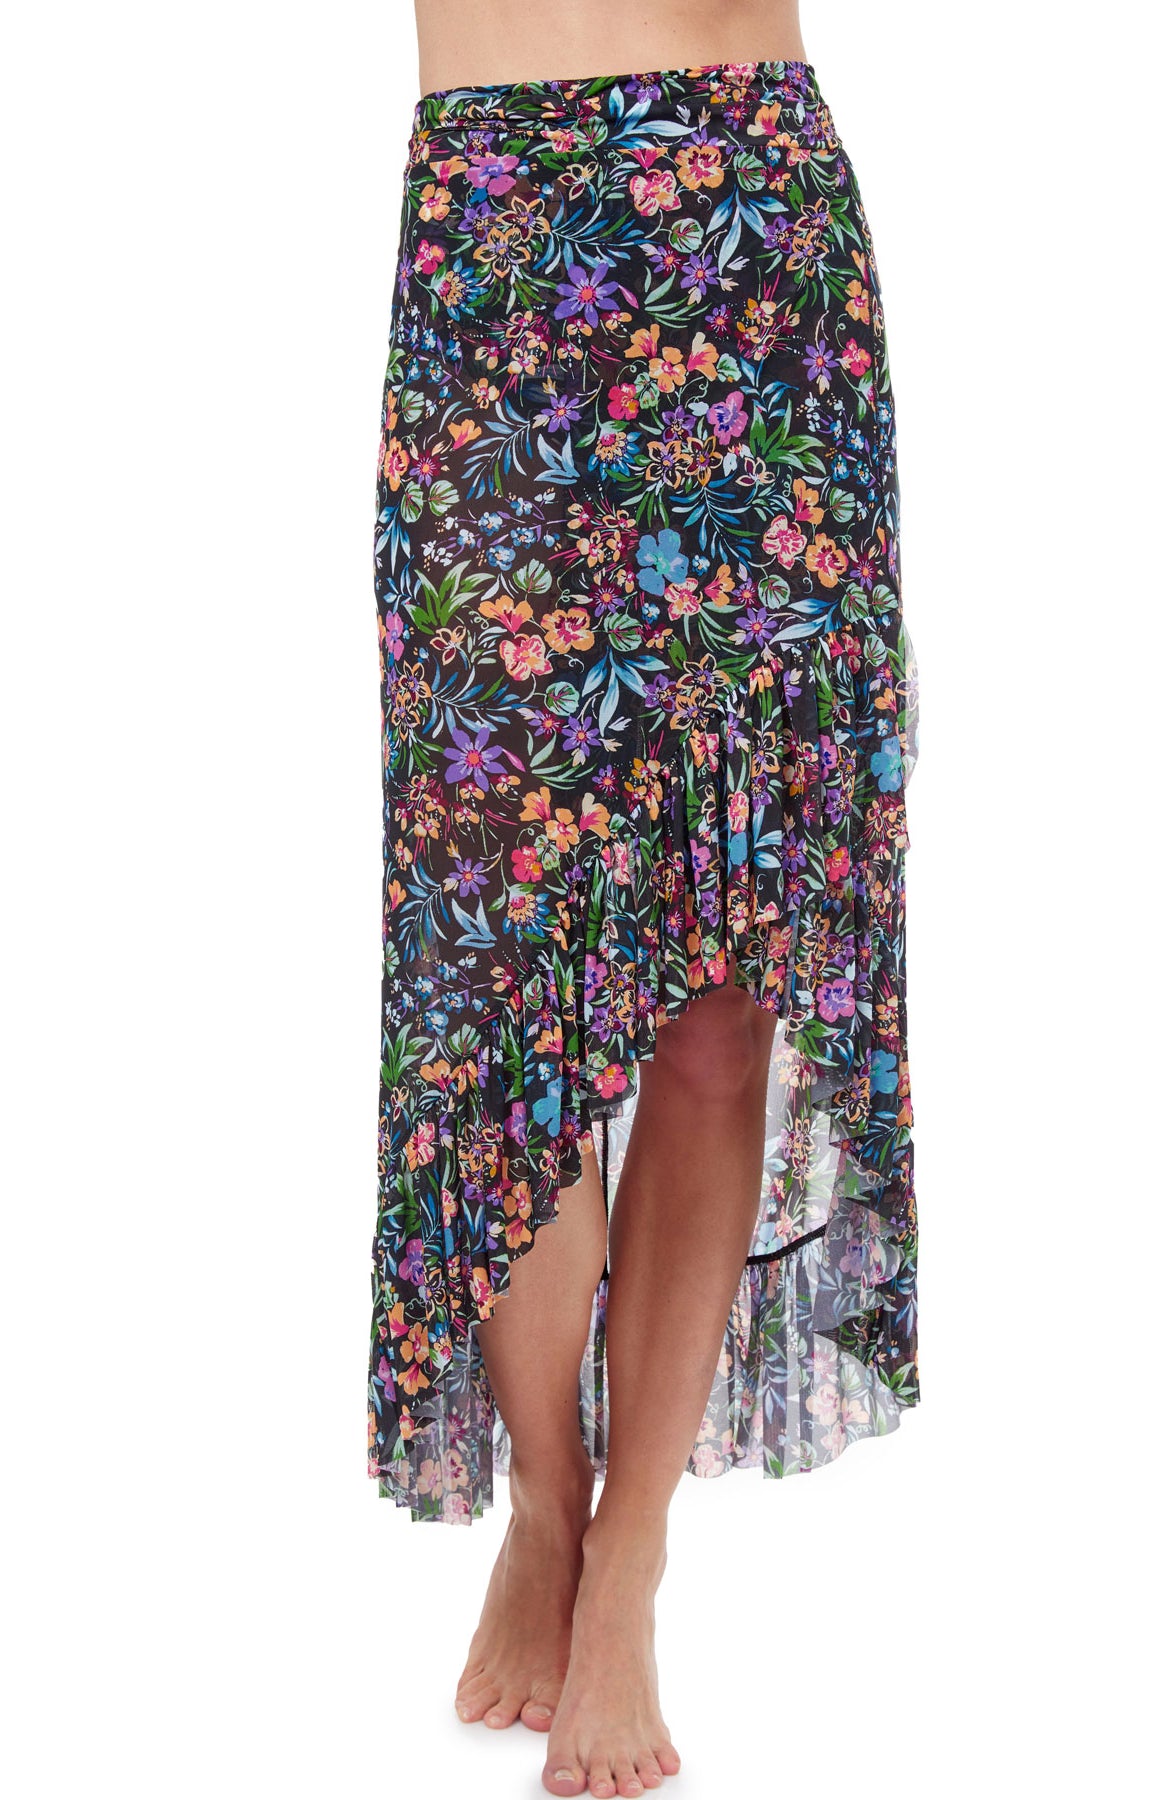 Profile: Flora Ruffled High Low Skirt Cover Up